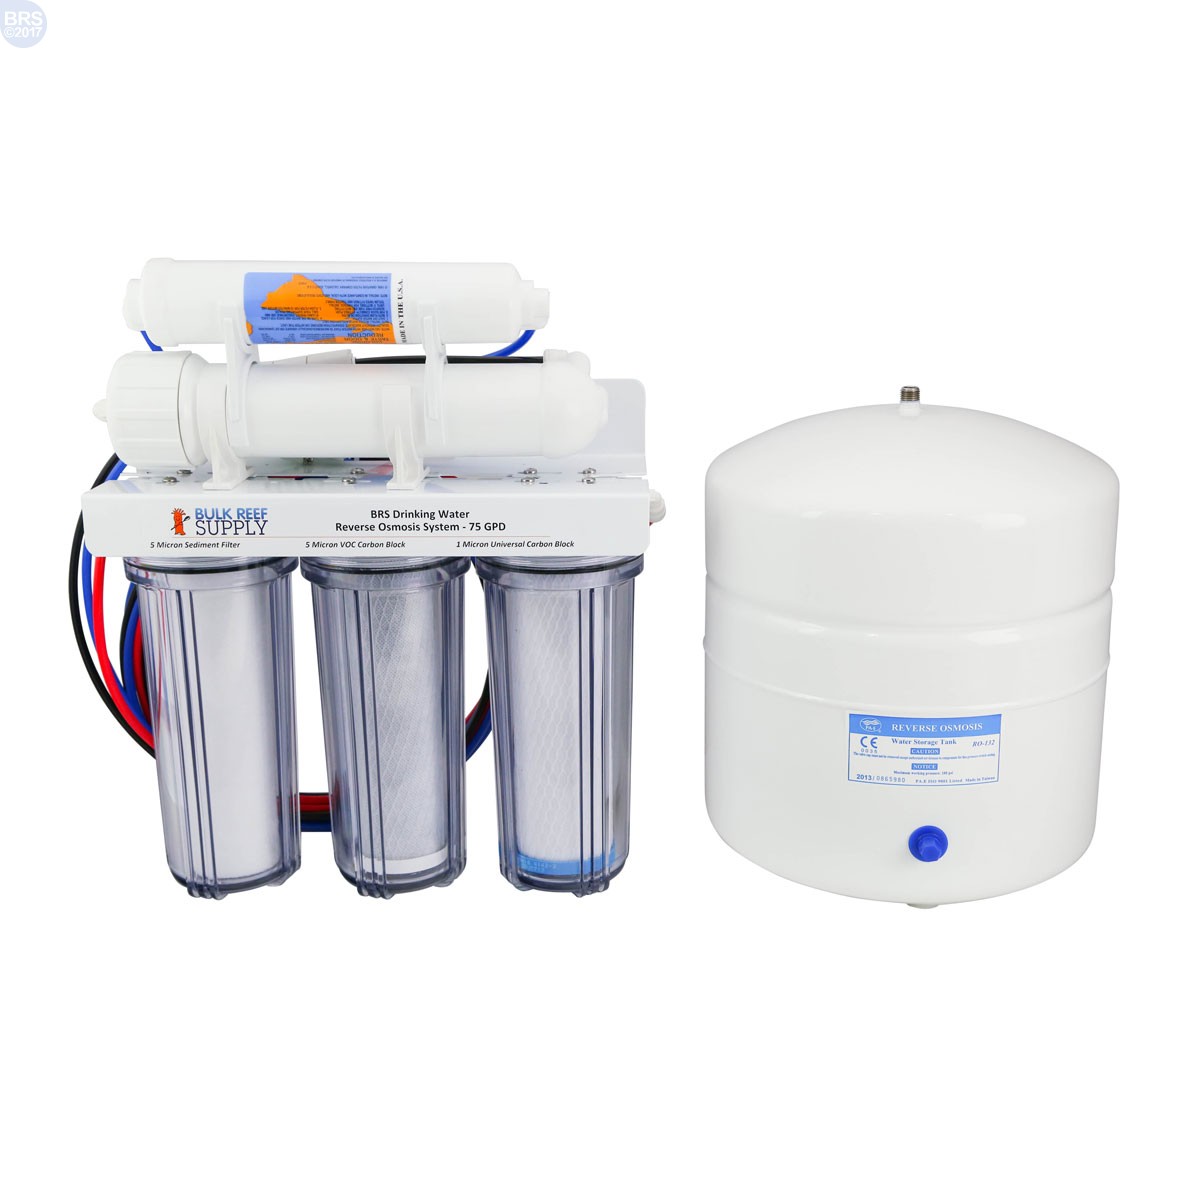 BRS 5 Stage Drinking Water RO System 75GPD Bulk Reef Supply